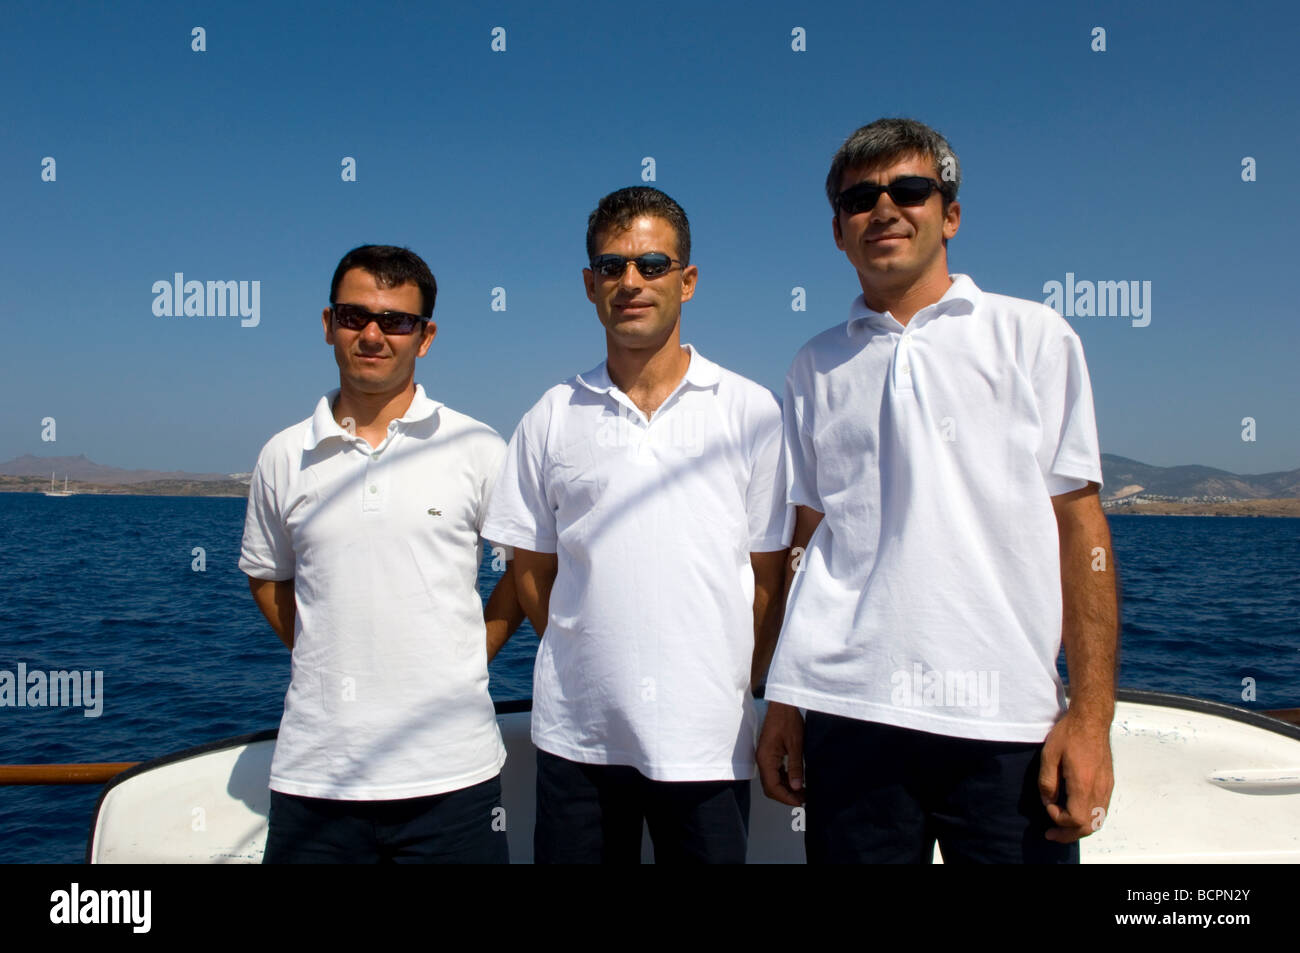 Crew members of a touring boat Stock Photo